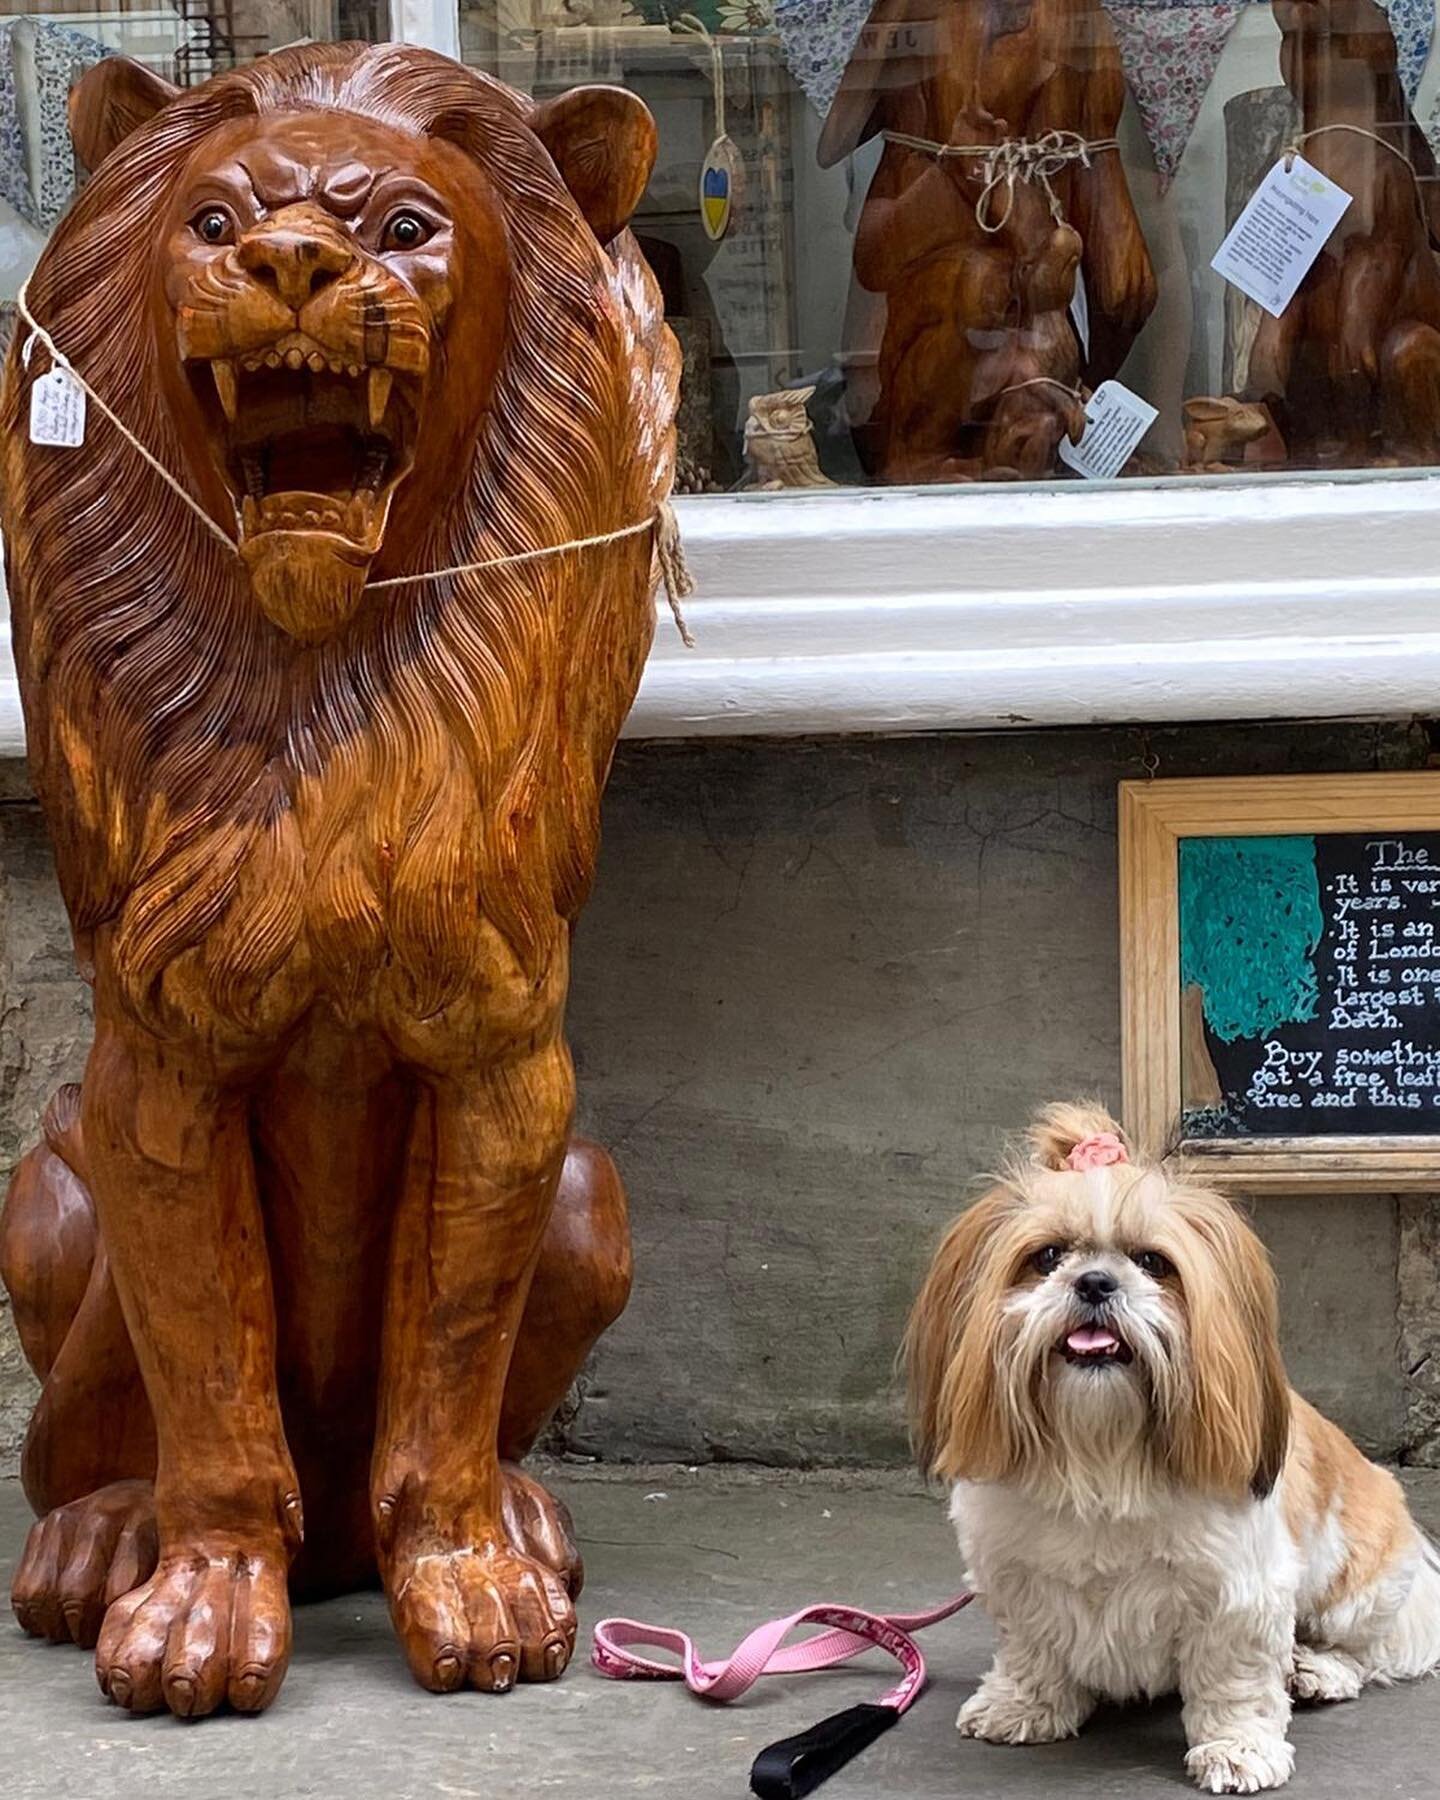 💗🐶💗My baby 🦁, Minnie 💗🐶💗

#shihtzu #shihtzusofinstagram #shihtzus #babylion #houseoflion 
Minnie&rsquo;s gorgeousness by @shampoocheddoggrooming
Huge wooden Lion, yours for only &pound;3950 at a shop near Bath Abbey